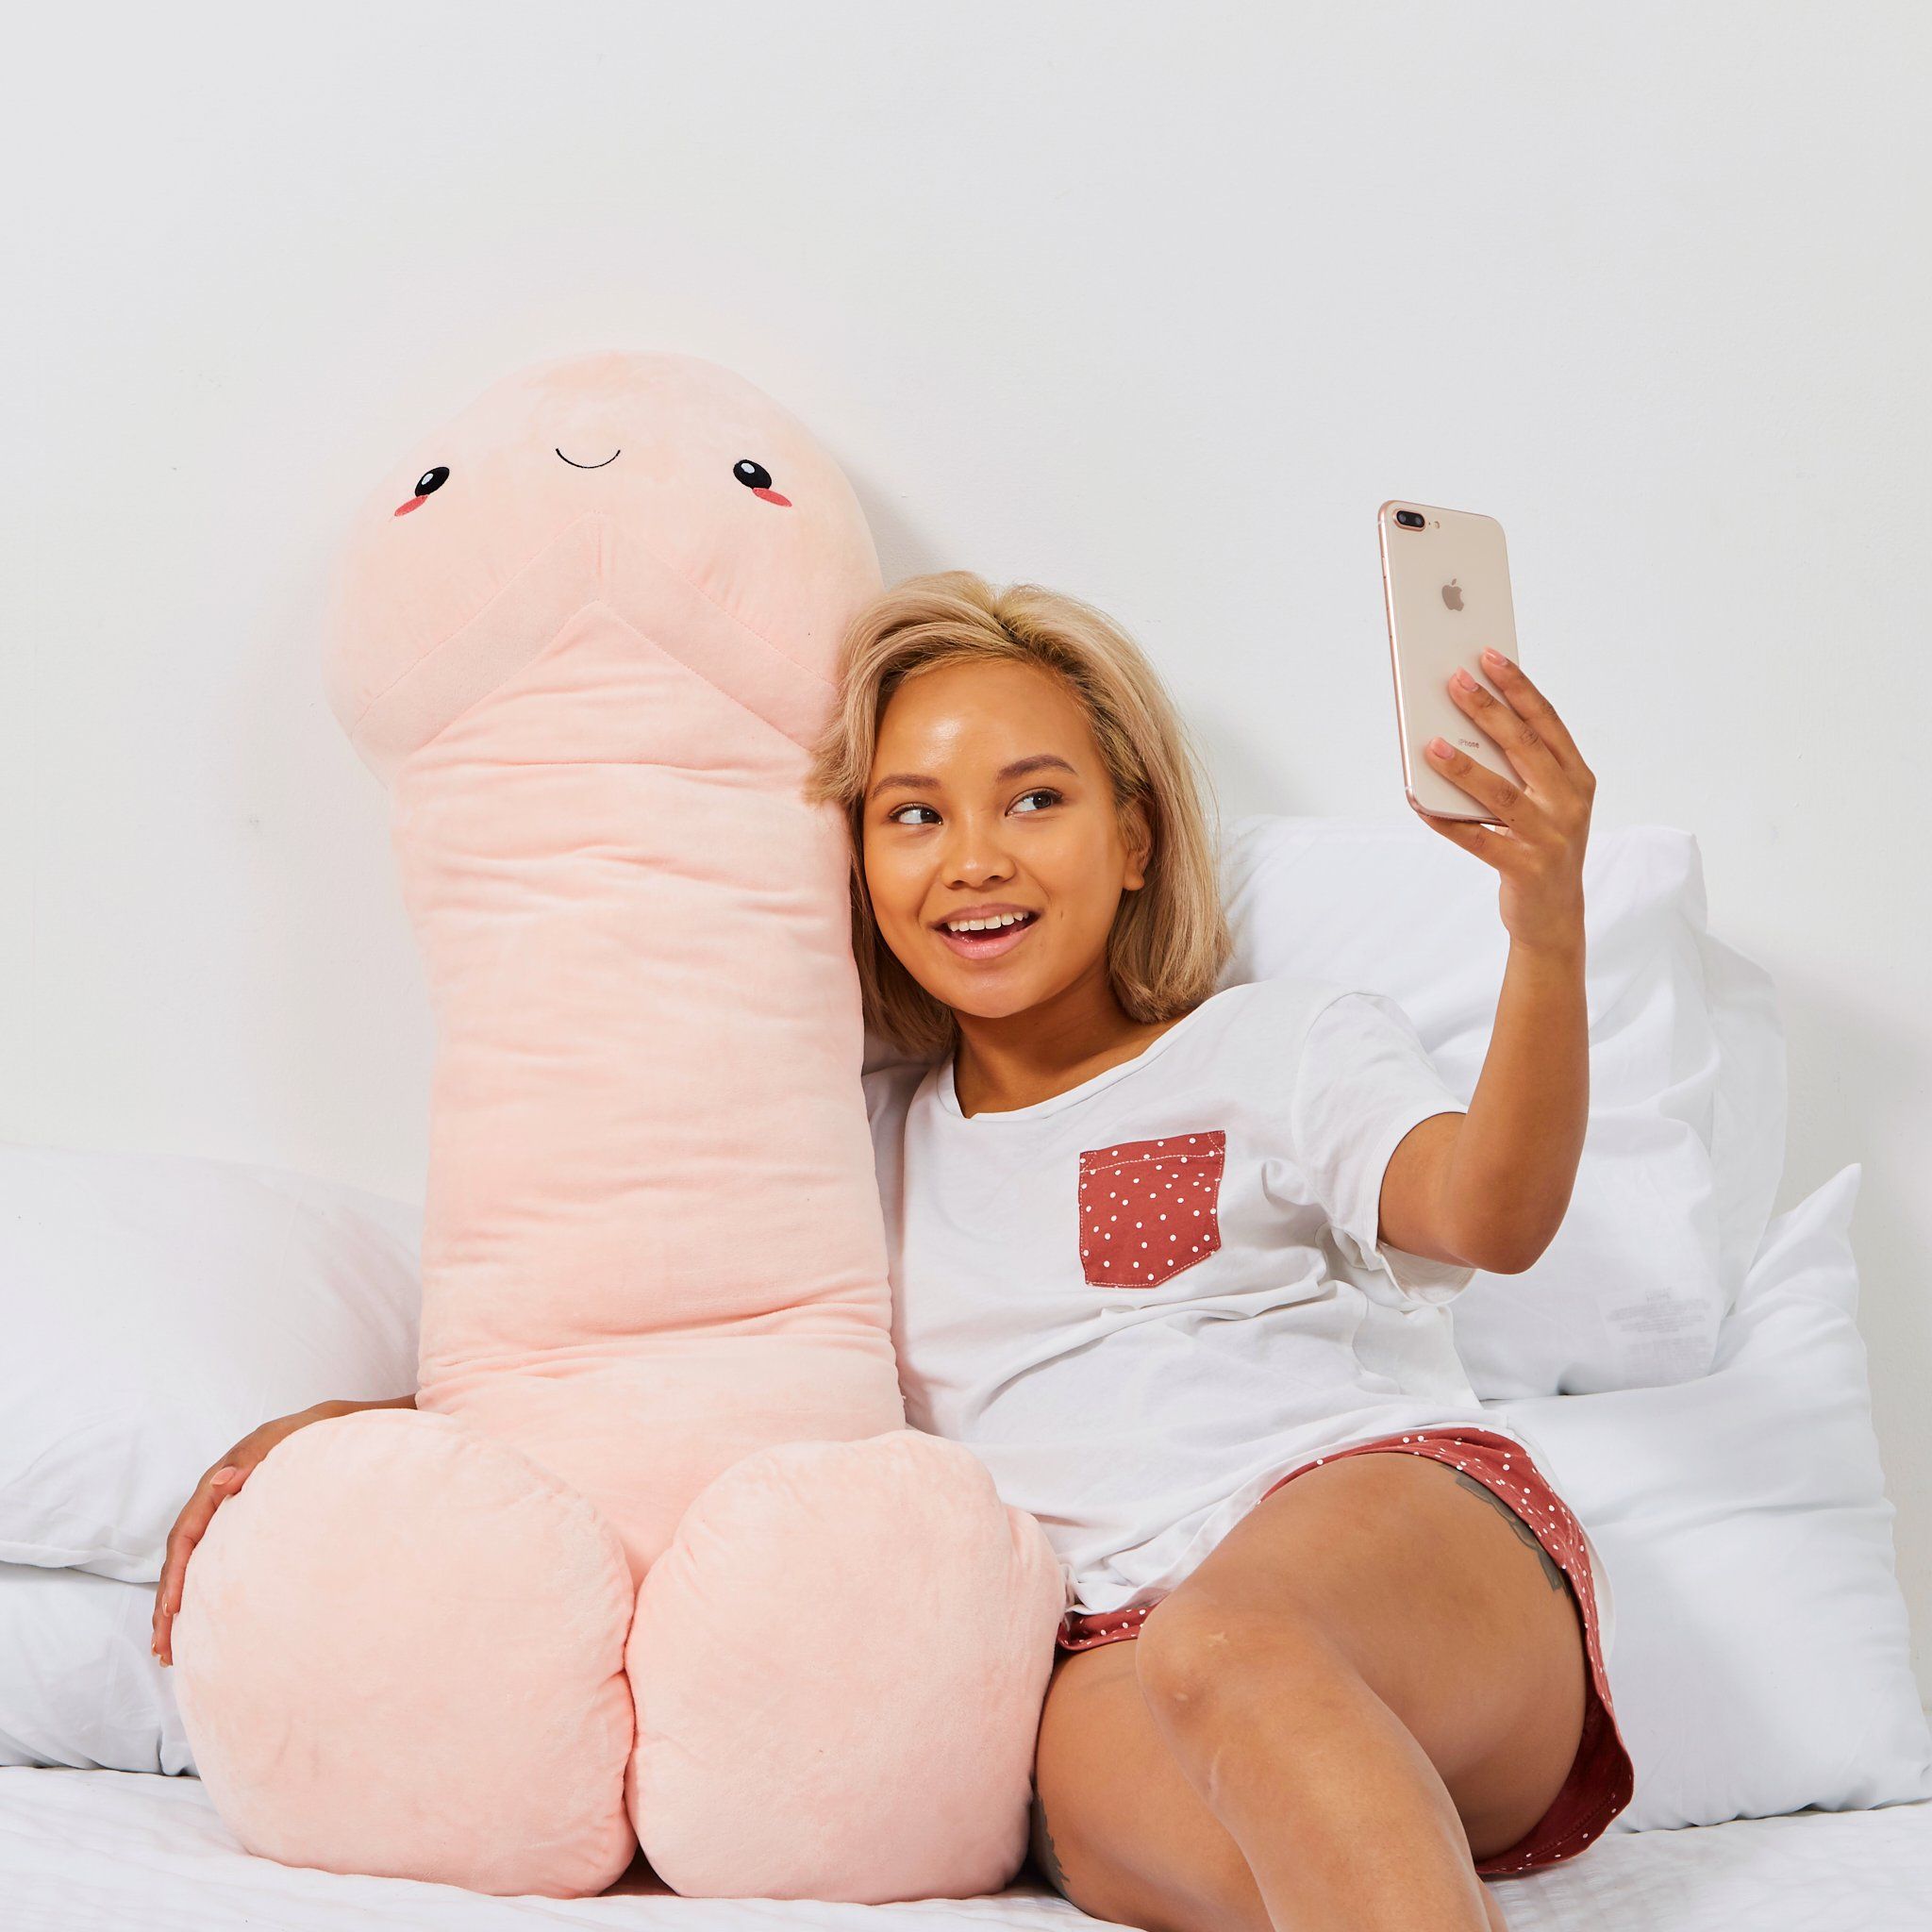 Jumbo Pierre The Willy Pillow Is Now Available In 2 Different Skin Tones For All Your Cuddling Needs